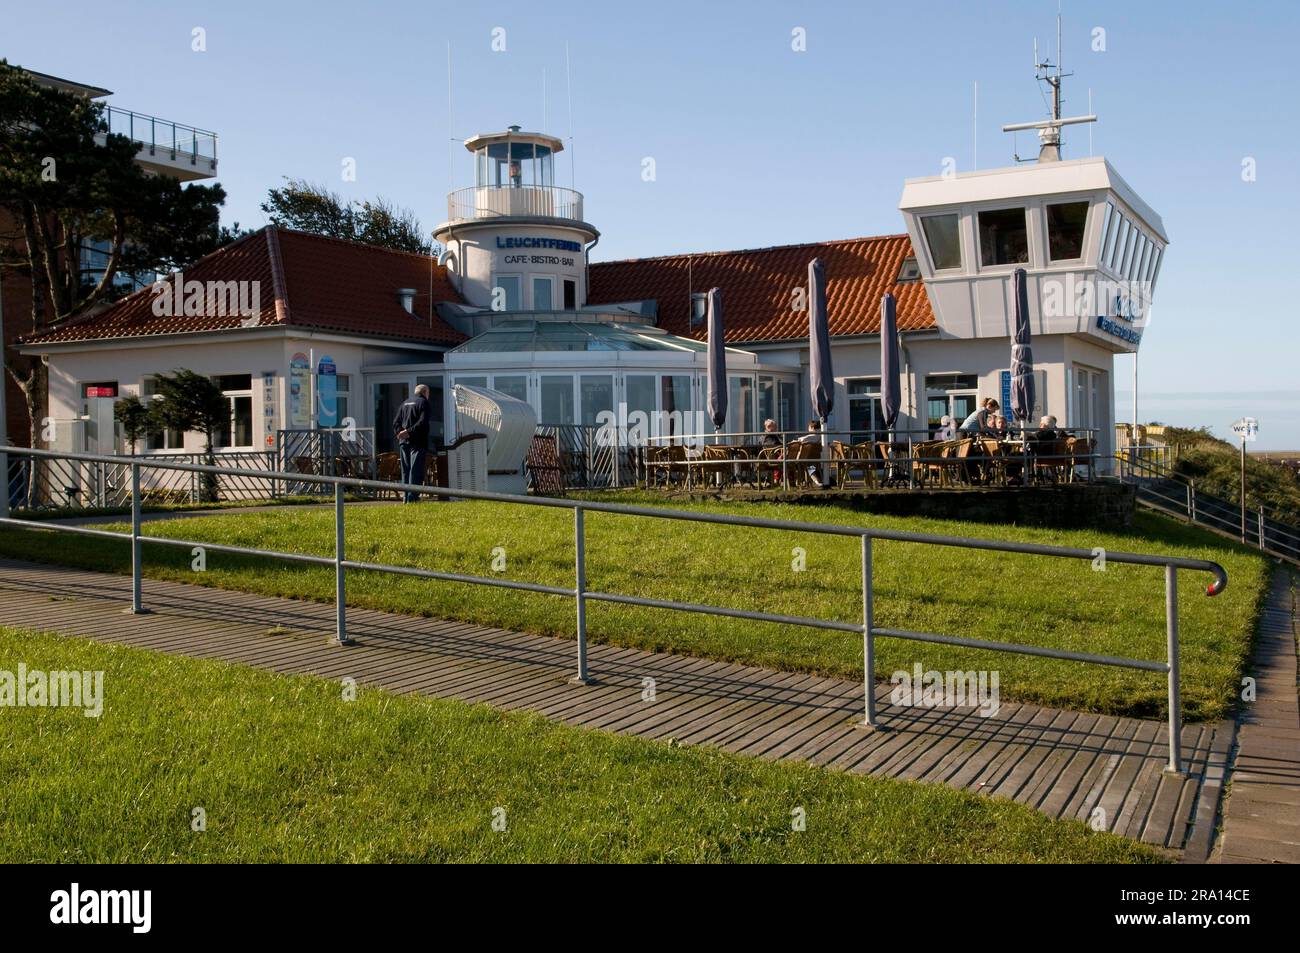 Cafe 'Leuchtfeuer', Rescue Station, Duhnen, Cuxhaven, Lower Saxony